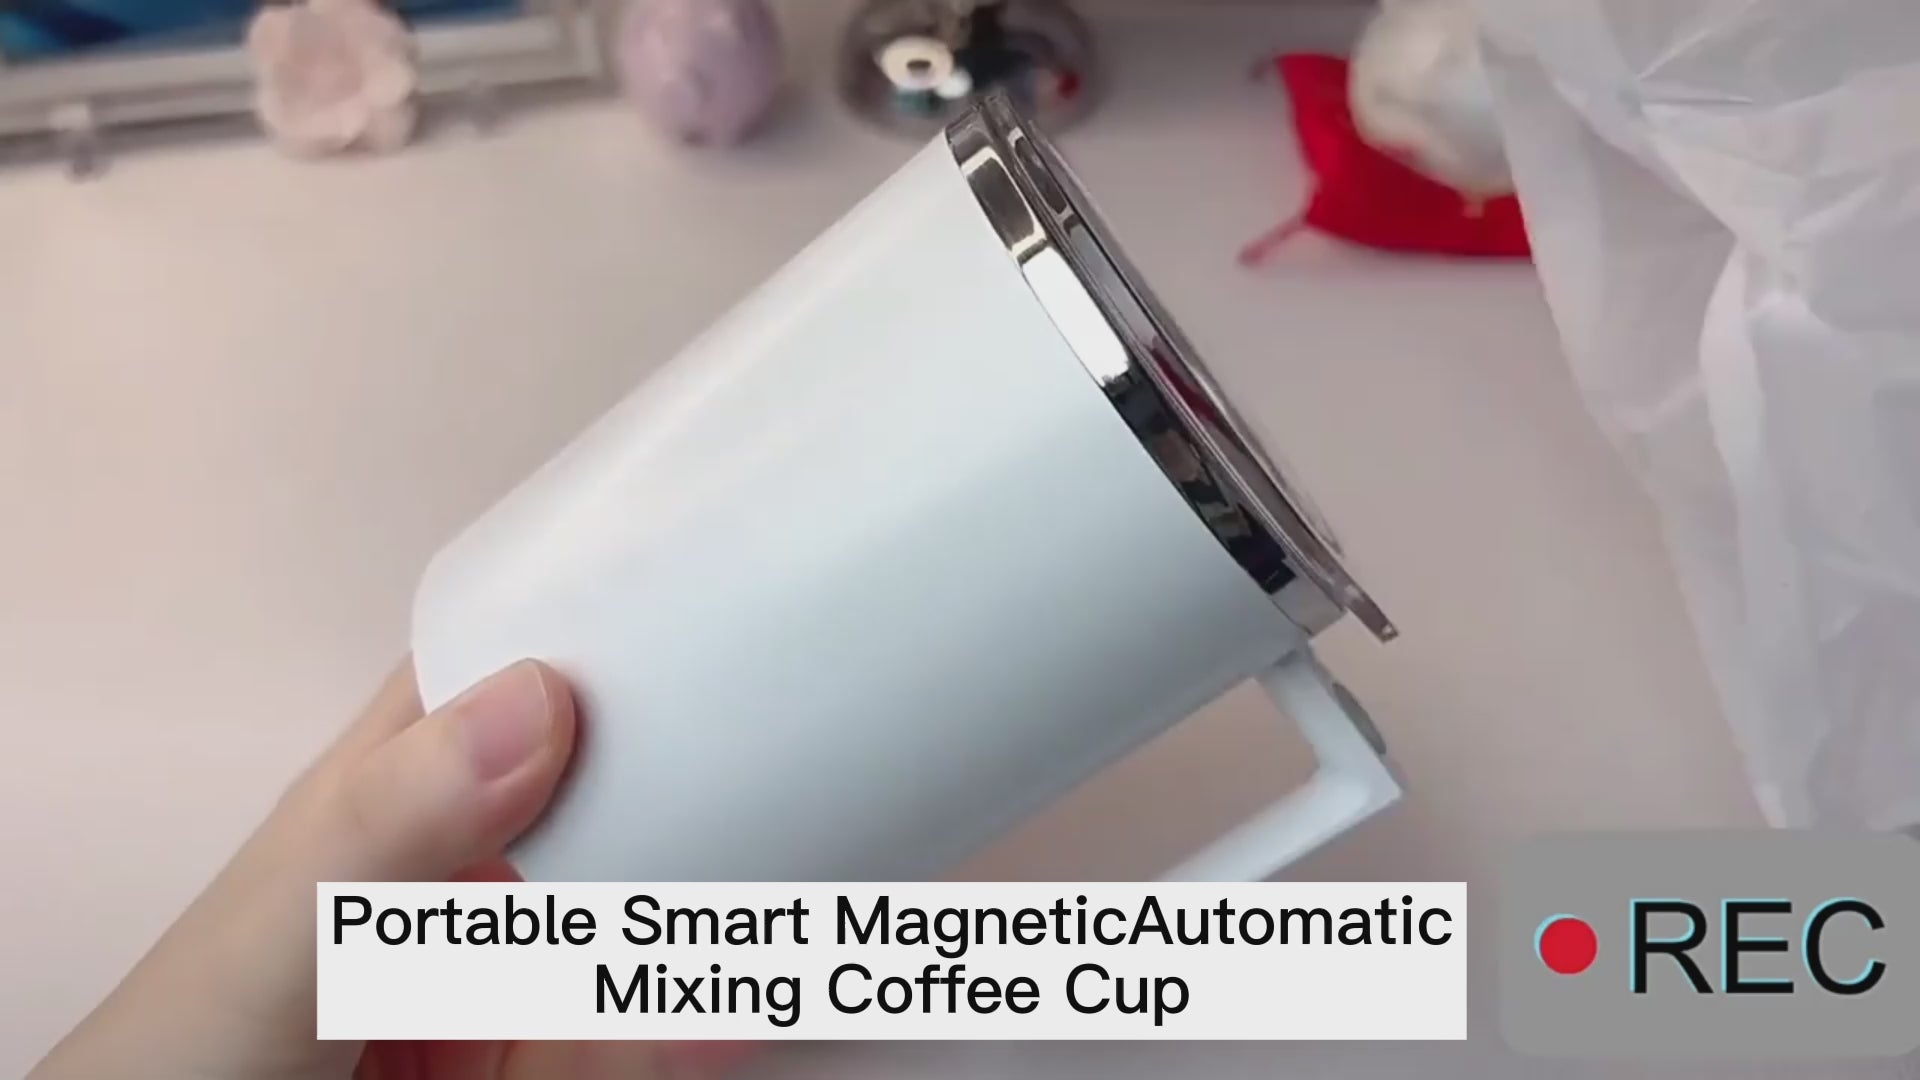 "Smart Portable Magnetic Coffee Cup: Automatic Mixing, Rechargeable, Ideal for Home, Office, and Travel"